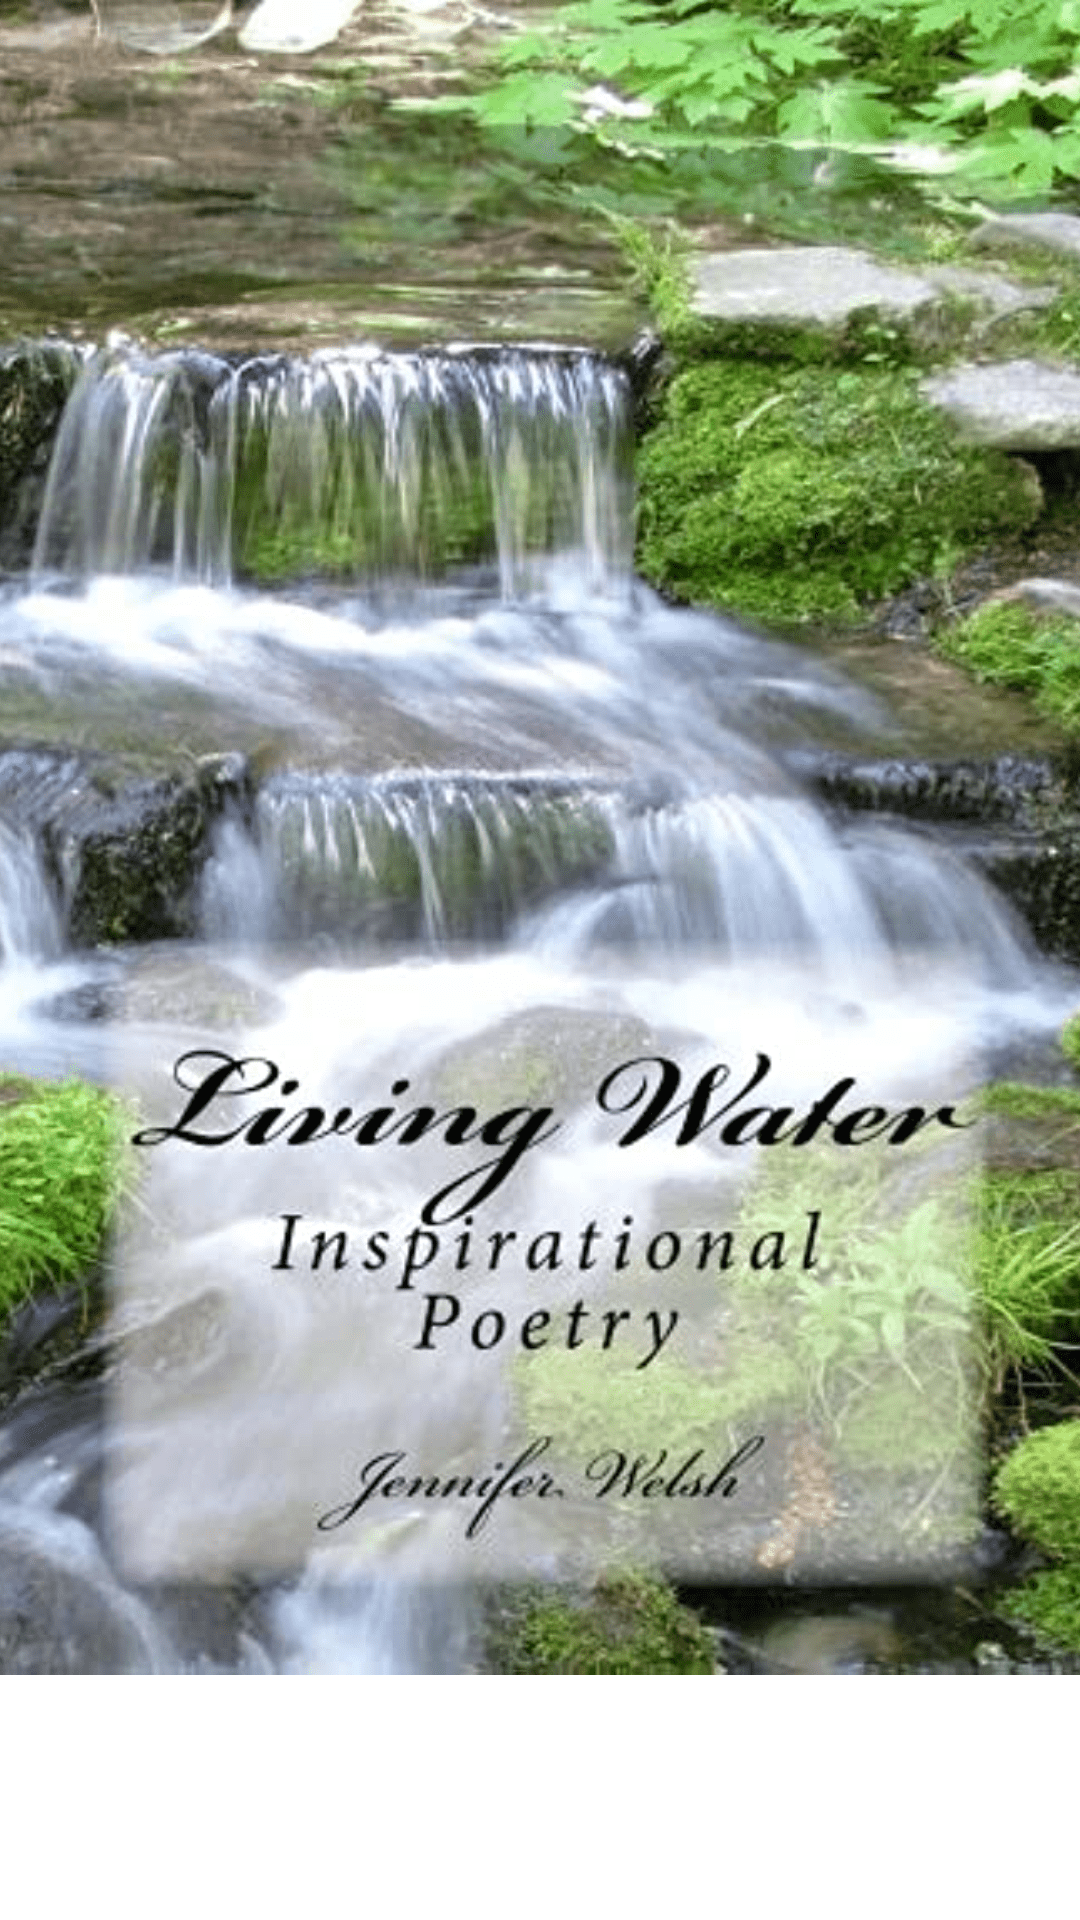 Living Water: Inspirational Poetry